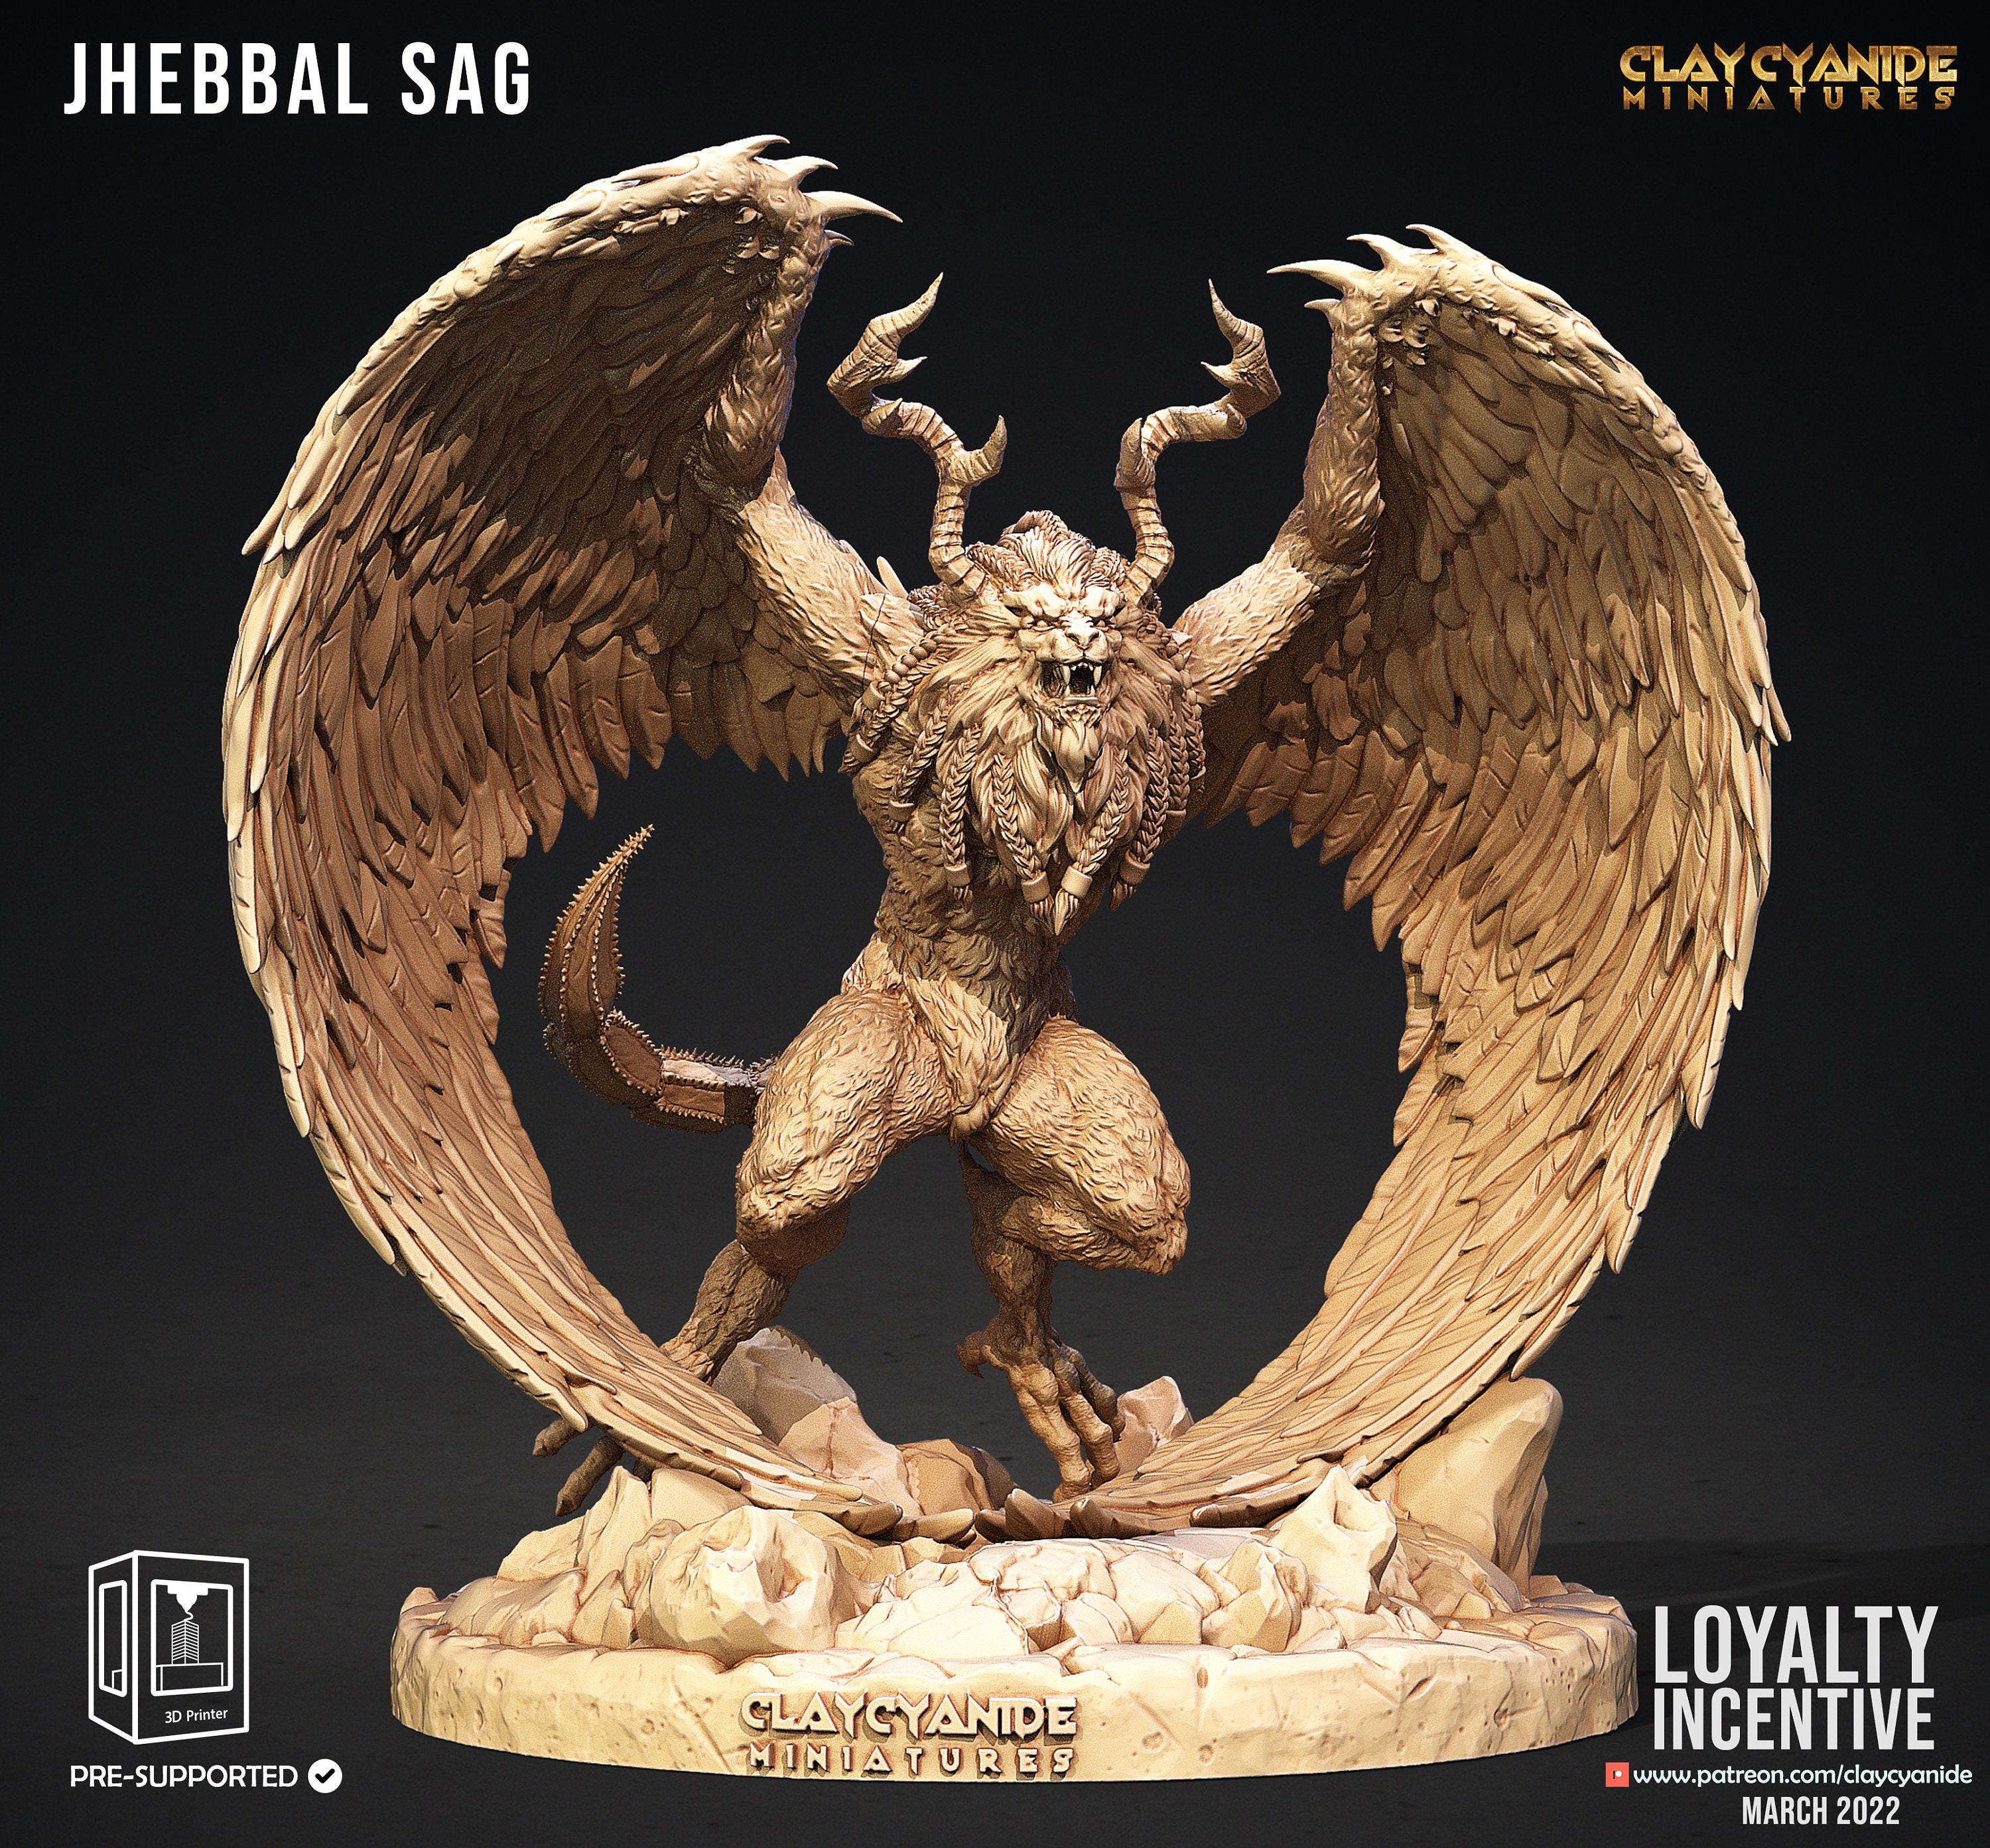 Jhebbal Sag by Clay Cyanide Dungeons and Dragons Tabletop - Etsy